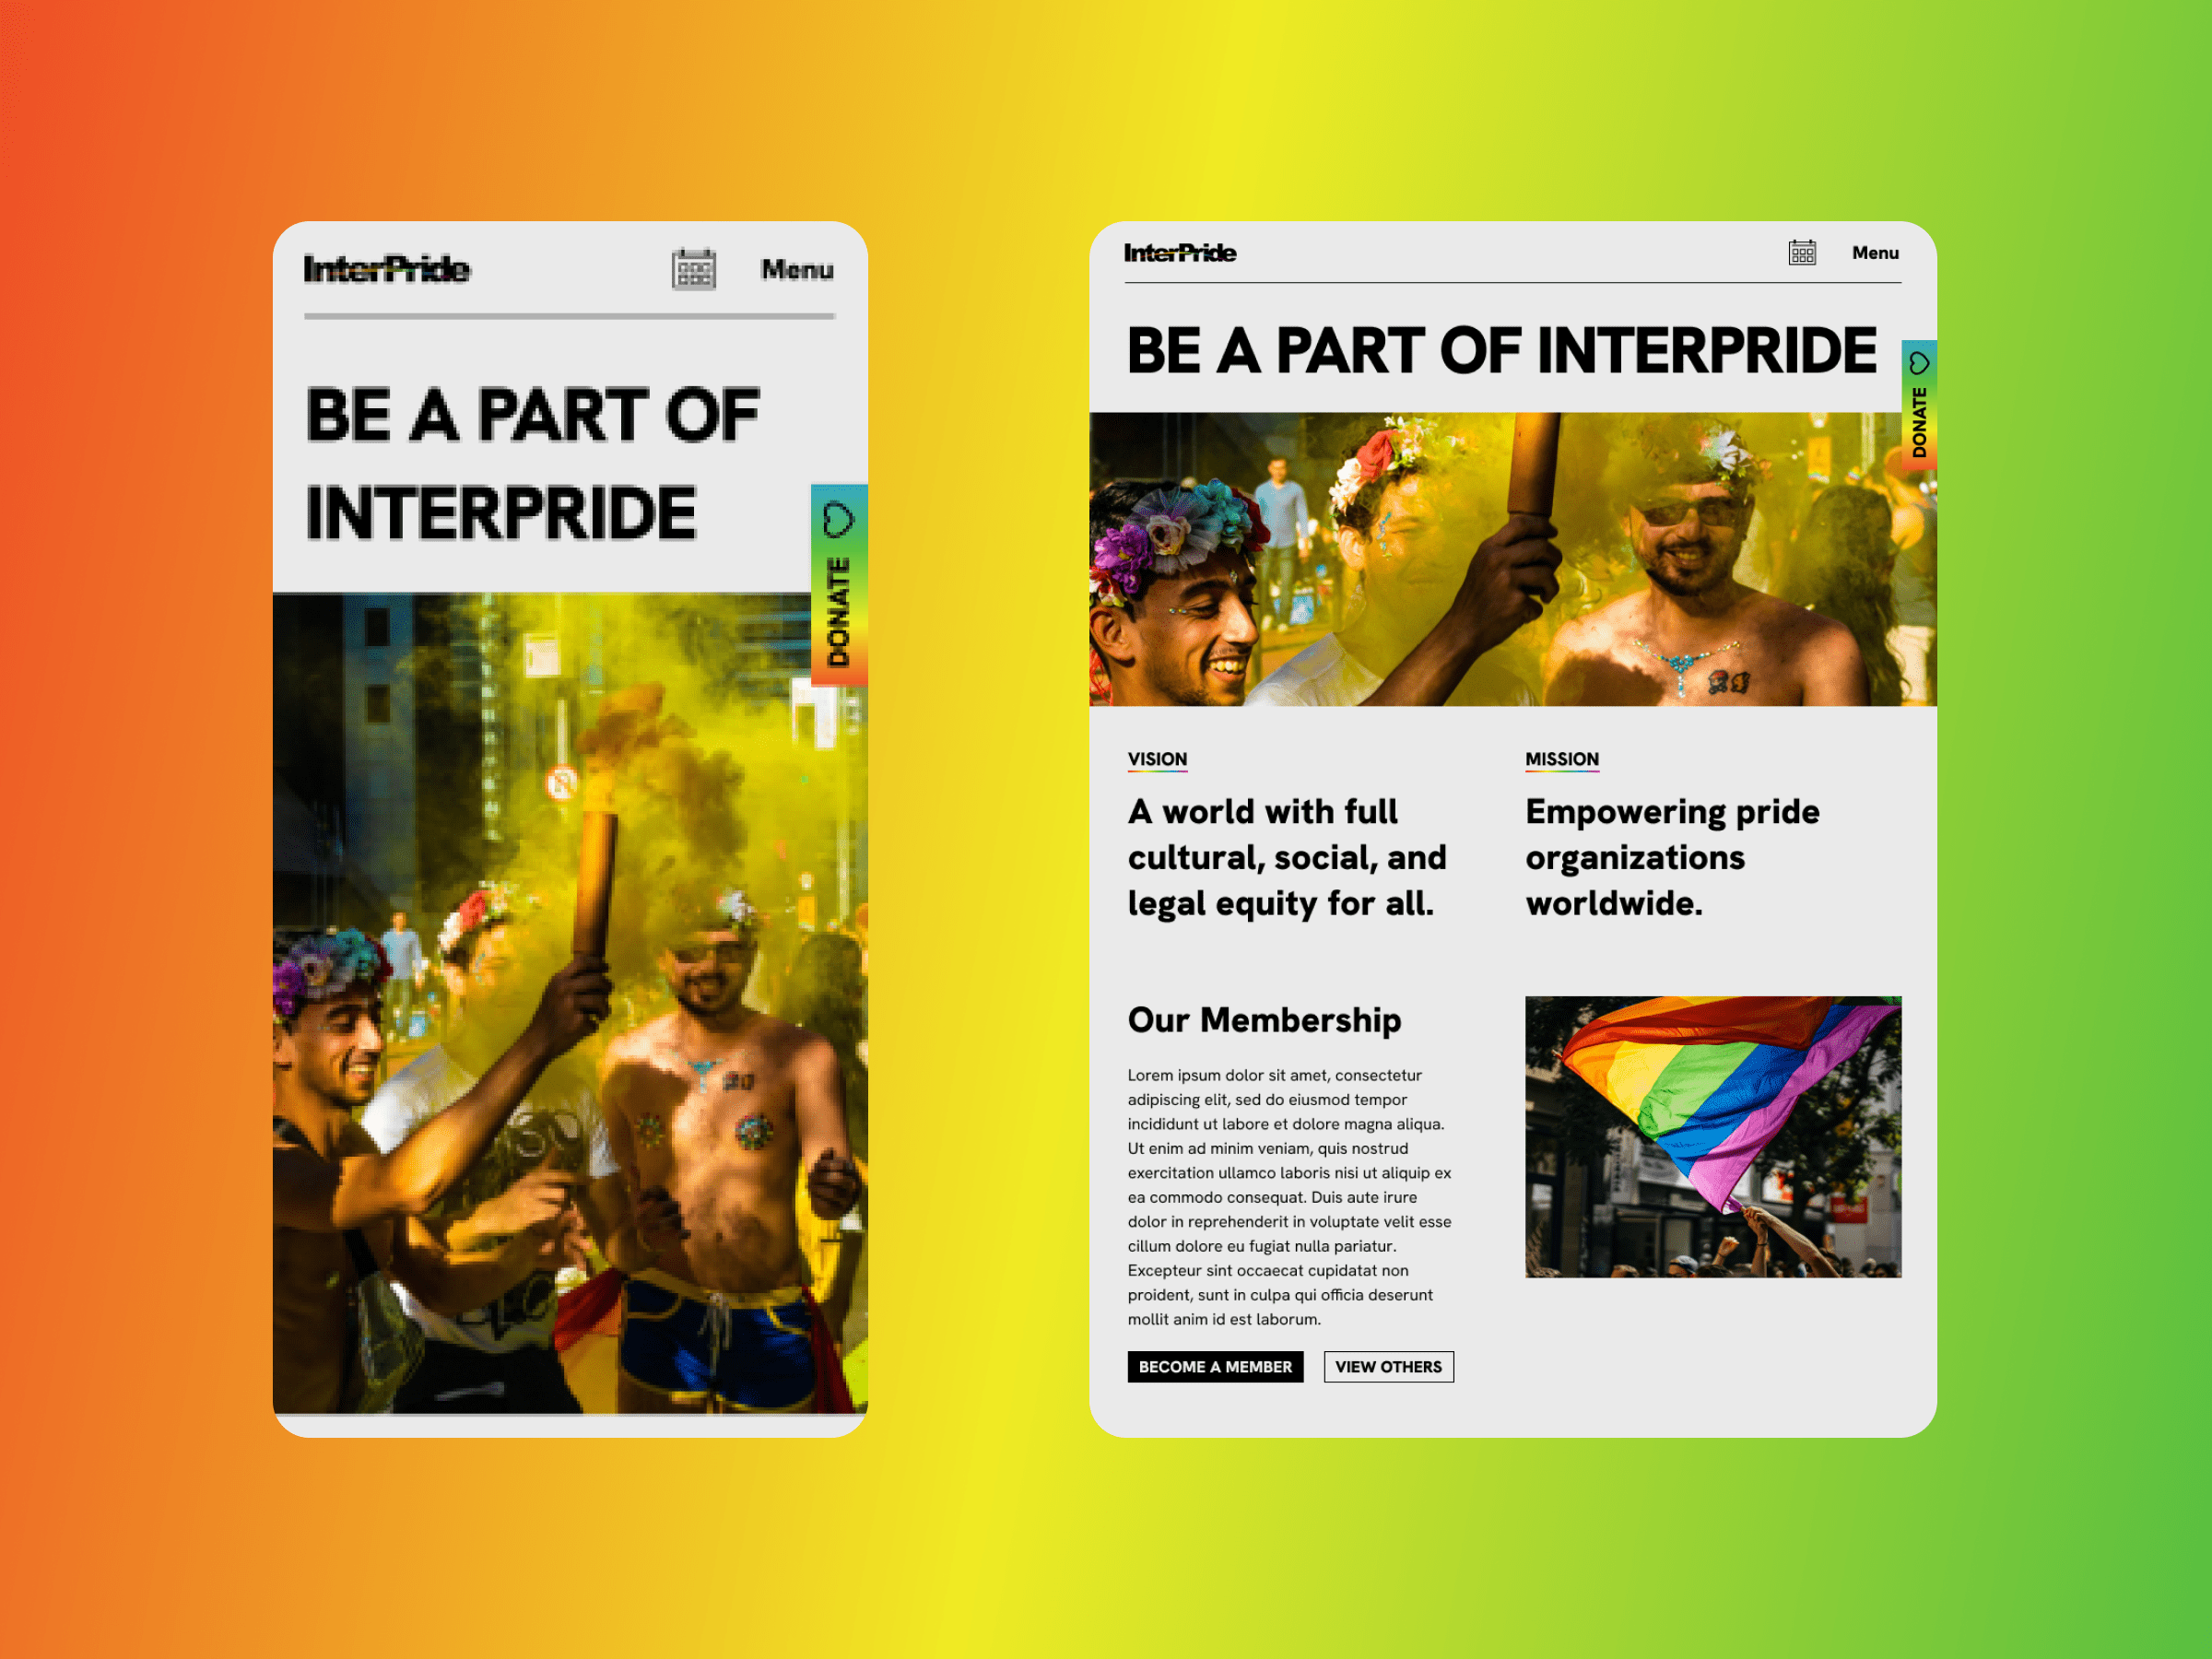 Be a part of InterPride page on InterPride website on mobile and tablet